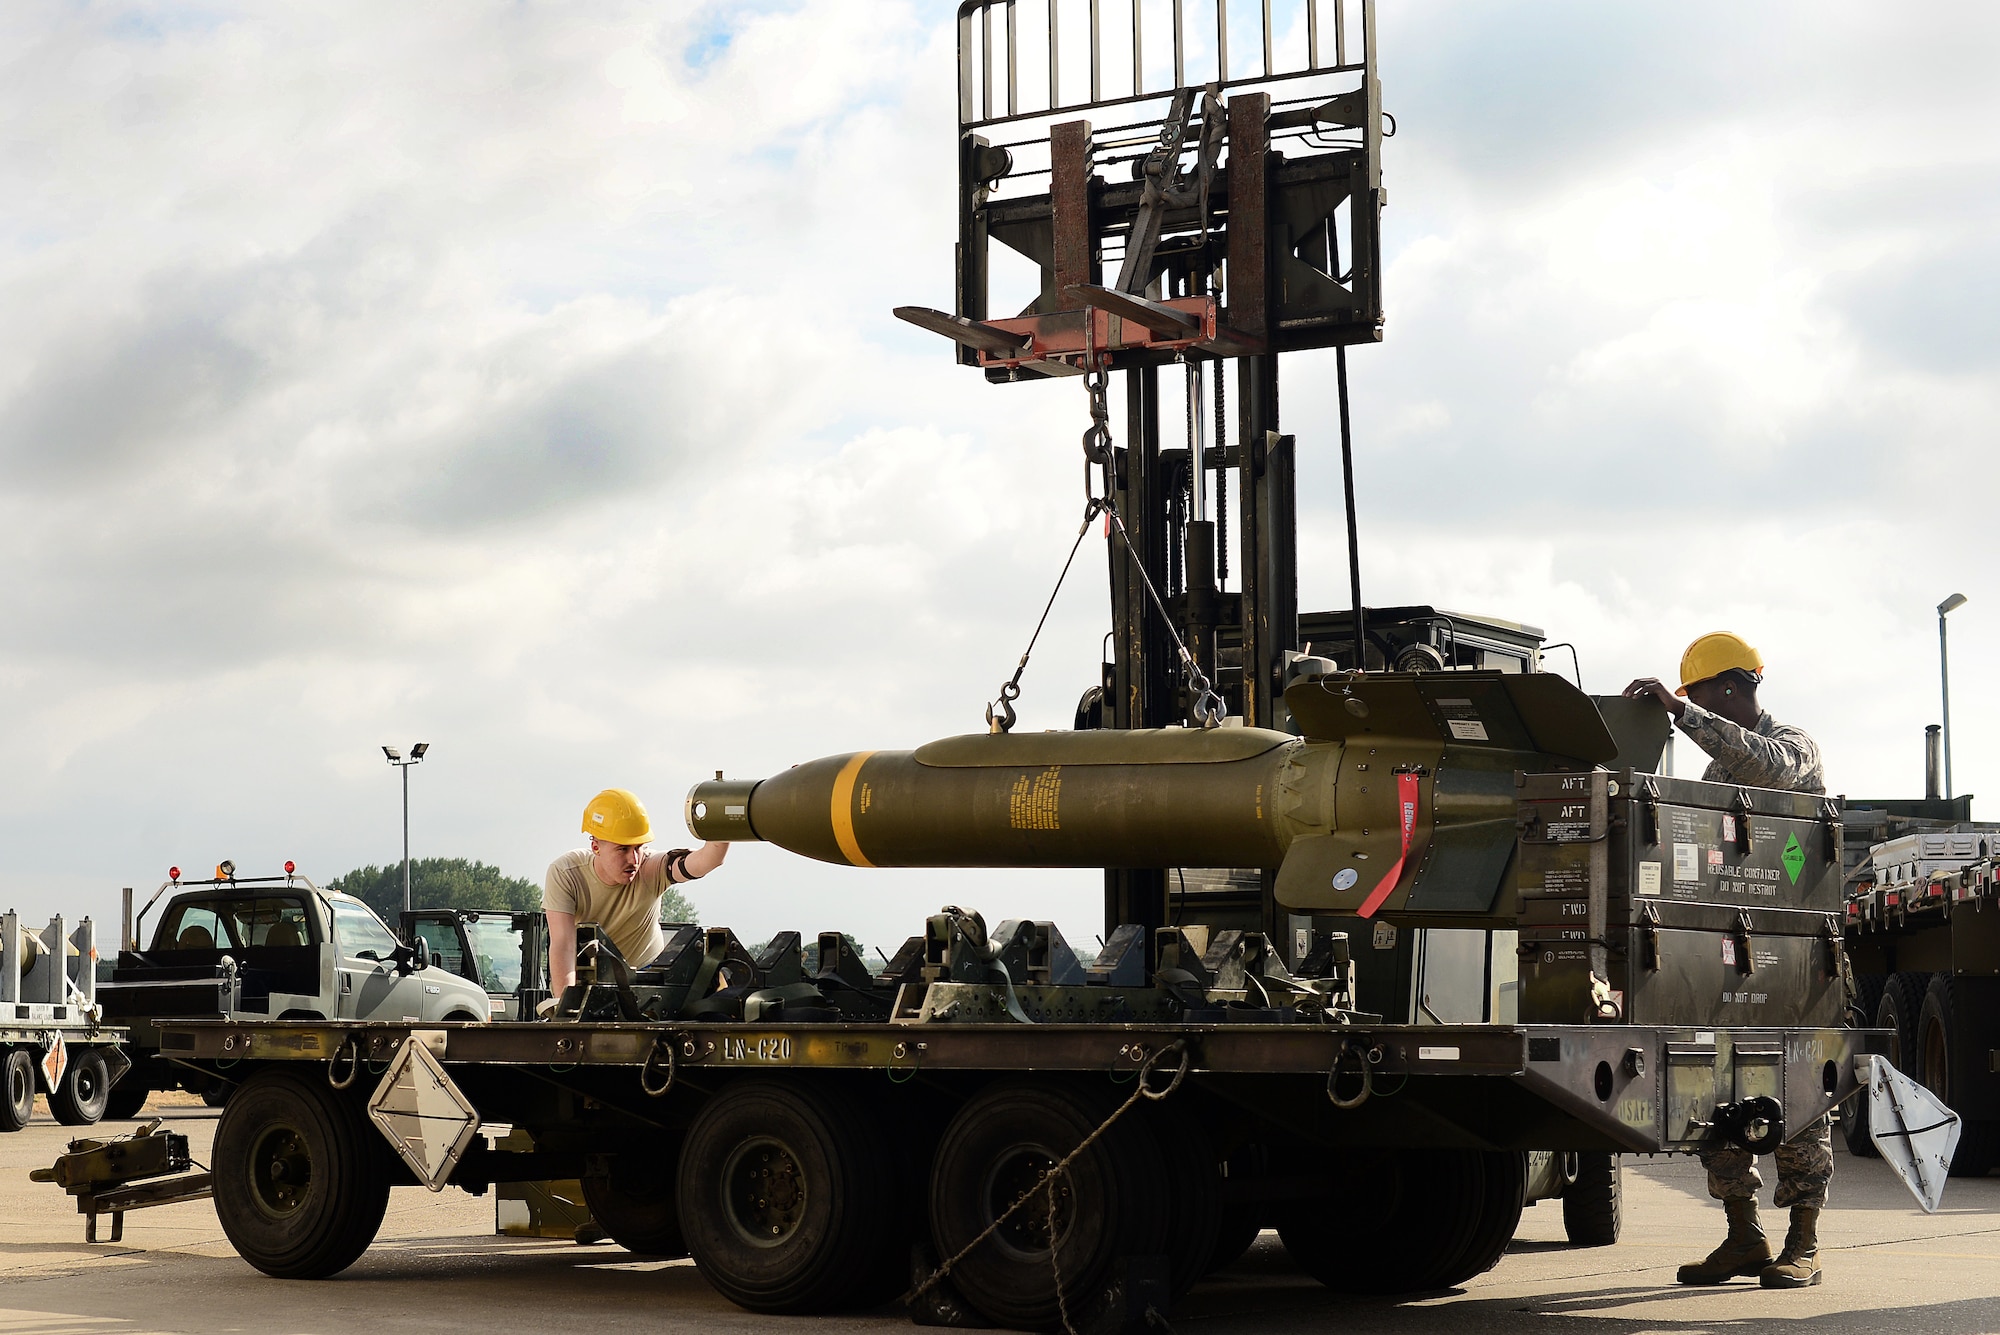 U.S. Air Force Munitions Airmen prepare a GBU-24 Paveway III laser-guided bomb for transport during the United States Air Forces in Europe-Air Forces Africa’s inaugural Combat Ammunition Production Exercise July 17, 2018. The 48th Fighter Wing Maintenance Group hosted approximately 160 Airmen from the 9th Munitions Squadron, Beale Air Force Base, Calif., 31st MXG, Aviano Air Base, Italy, 52nd MXG, Spangdahlem AB, Germany, 86th Logistics Readiness Group, Ramstein AB, Germany, and the 422nd Air Base Group, 501st Combat Support Wing, RAF Alconbury, England to participate in the training. (U.S. Air Force photo/ Tech. Sgt. Matthew Plew)